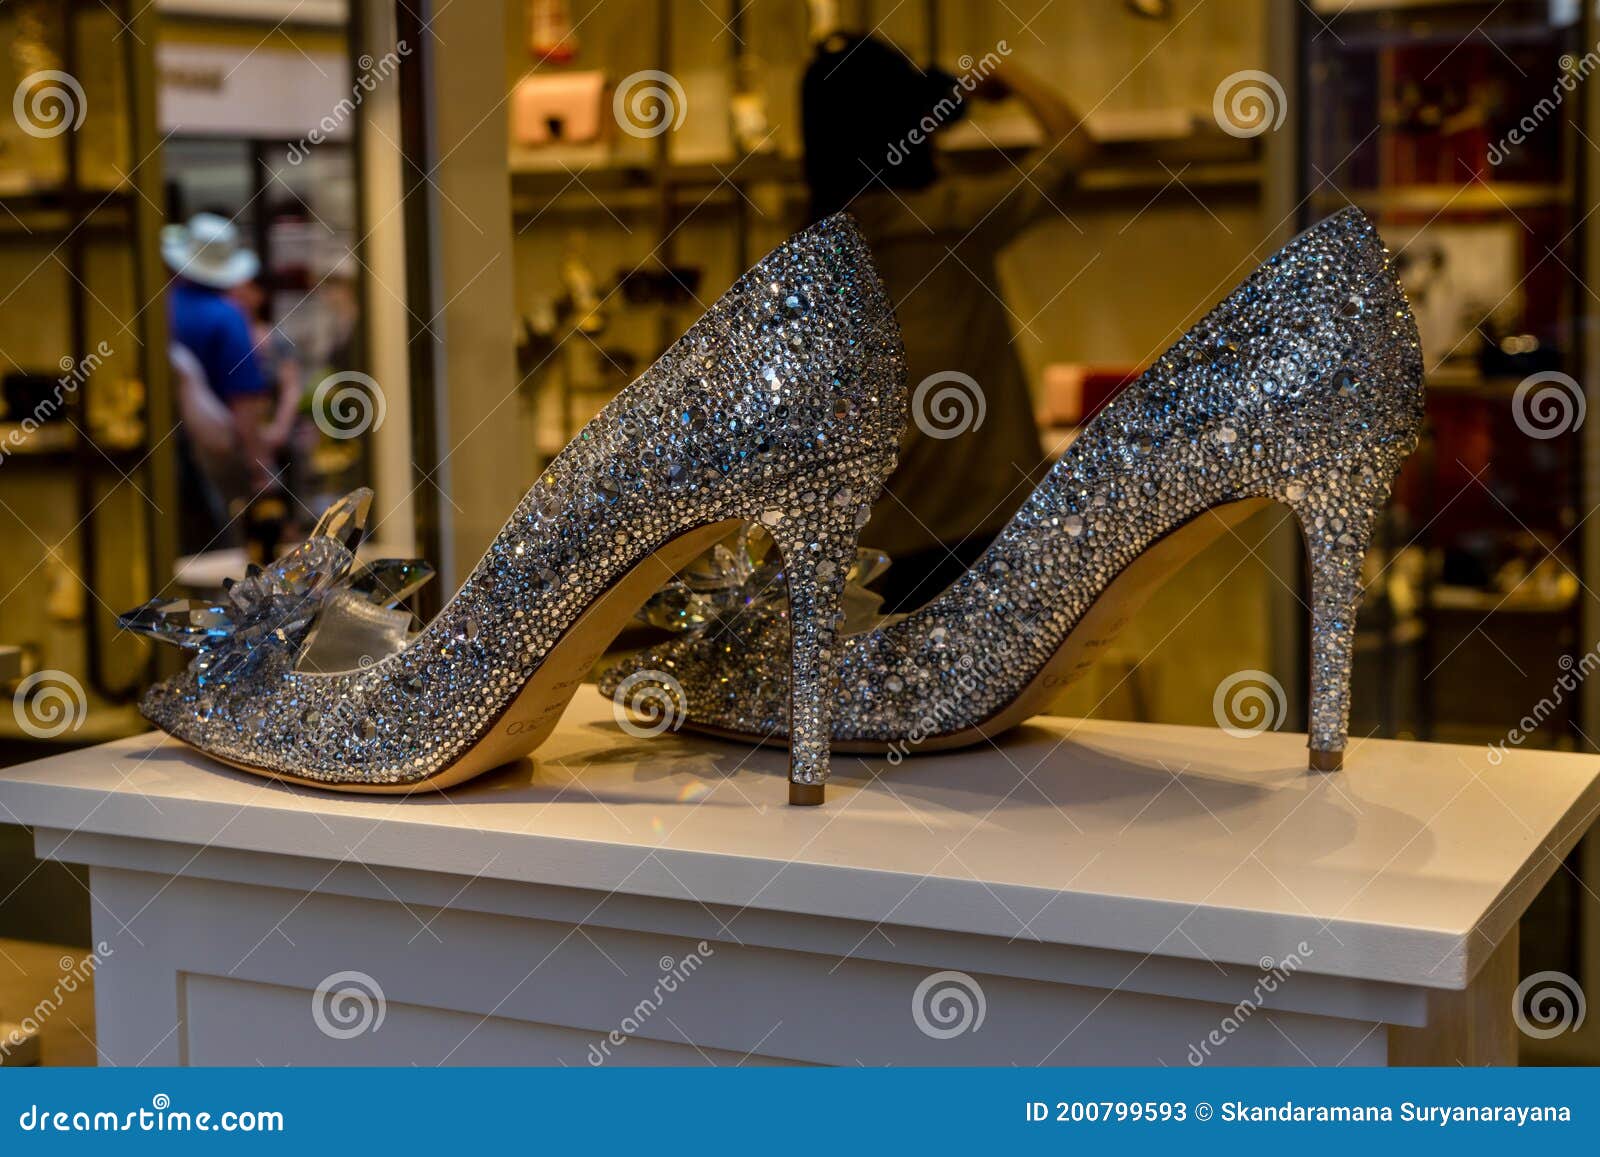 315 Choo Jimmy Shoes Stock Photos - Free & Royalty-Free Stock Photos from  Dreamstime